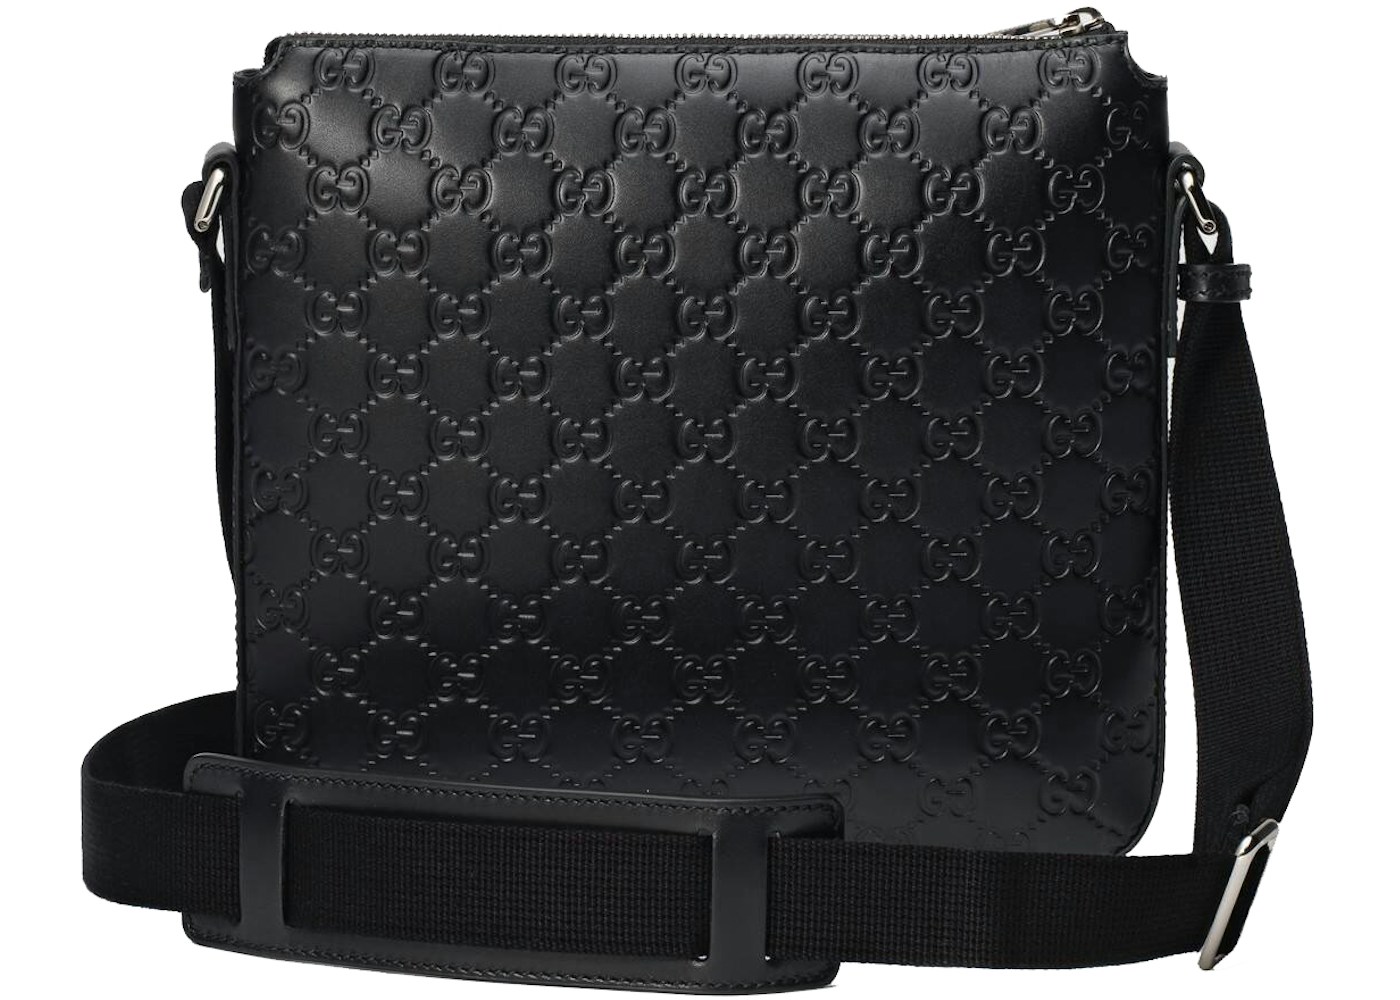 Gucci Signature Messenger Black in Leather with Silver-tone